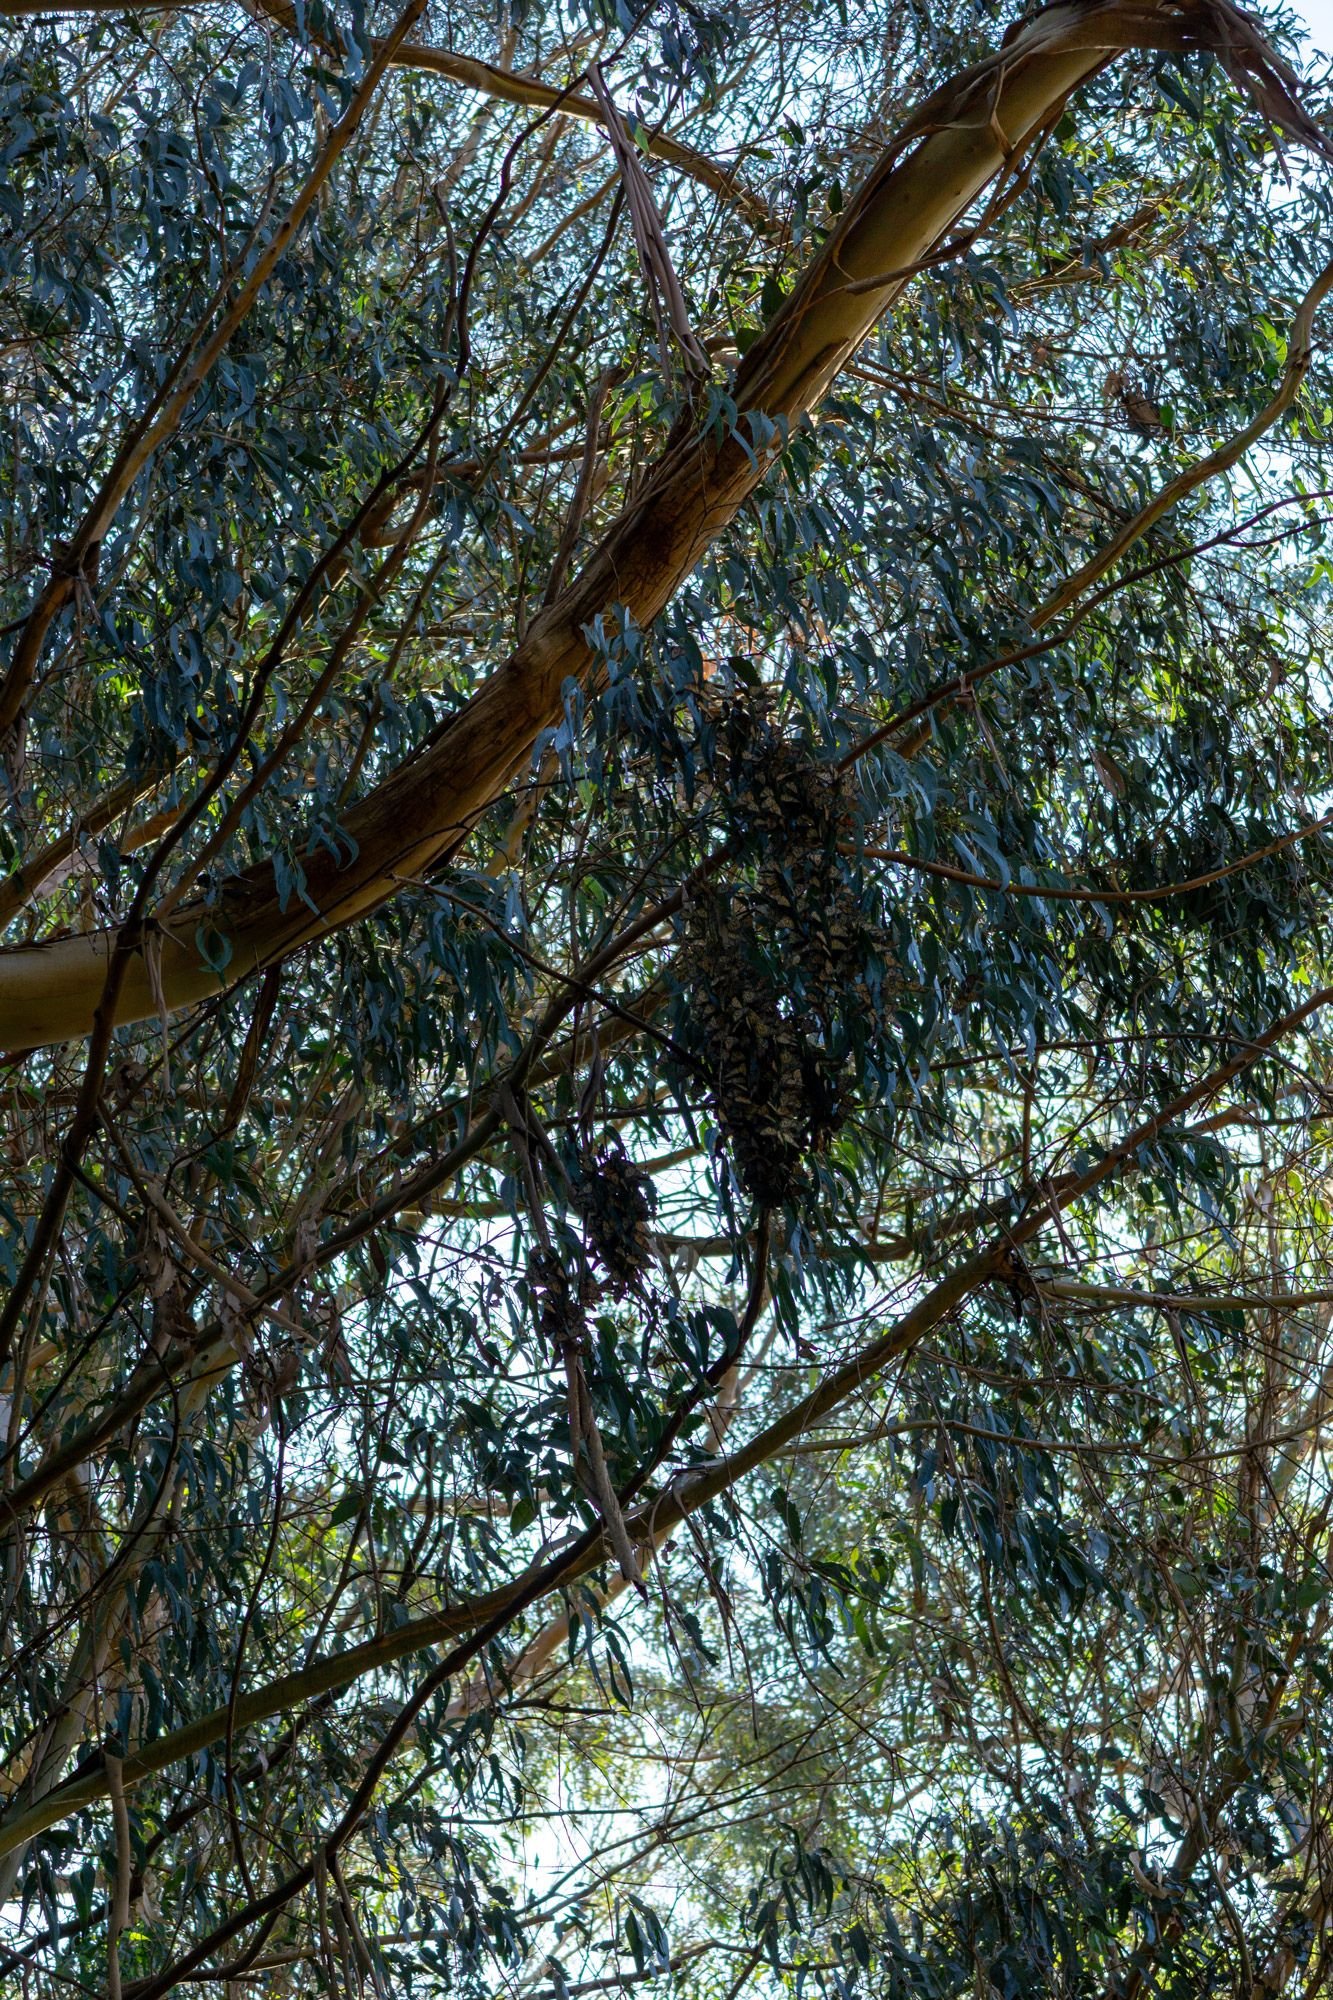 A view of Eucalyptus with clusters of monarch butterflies.